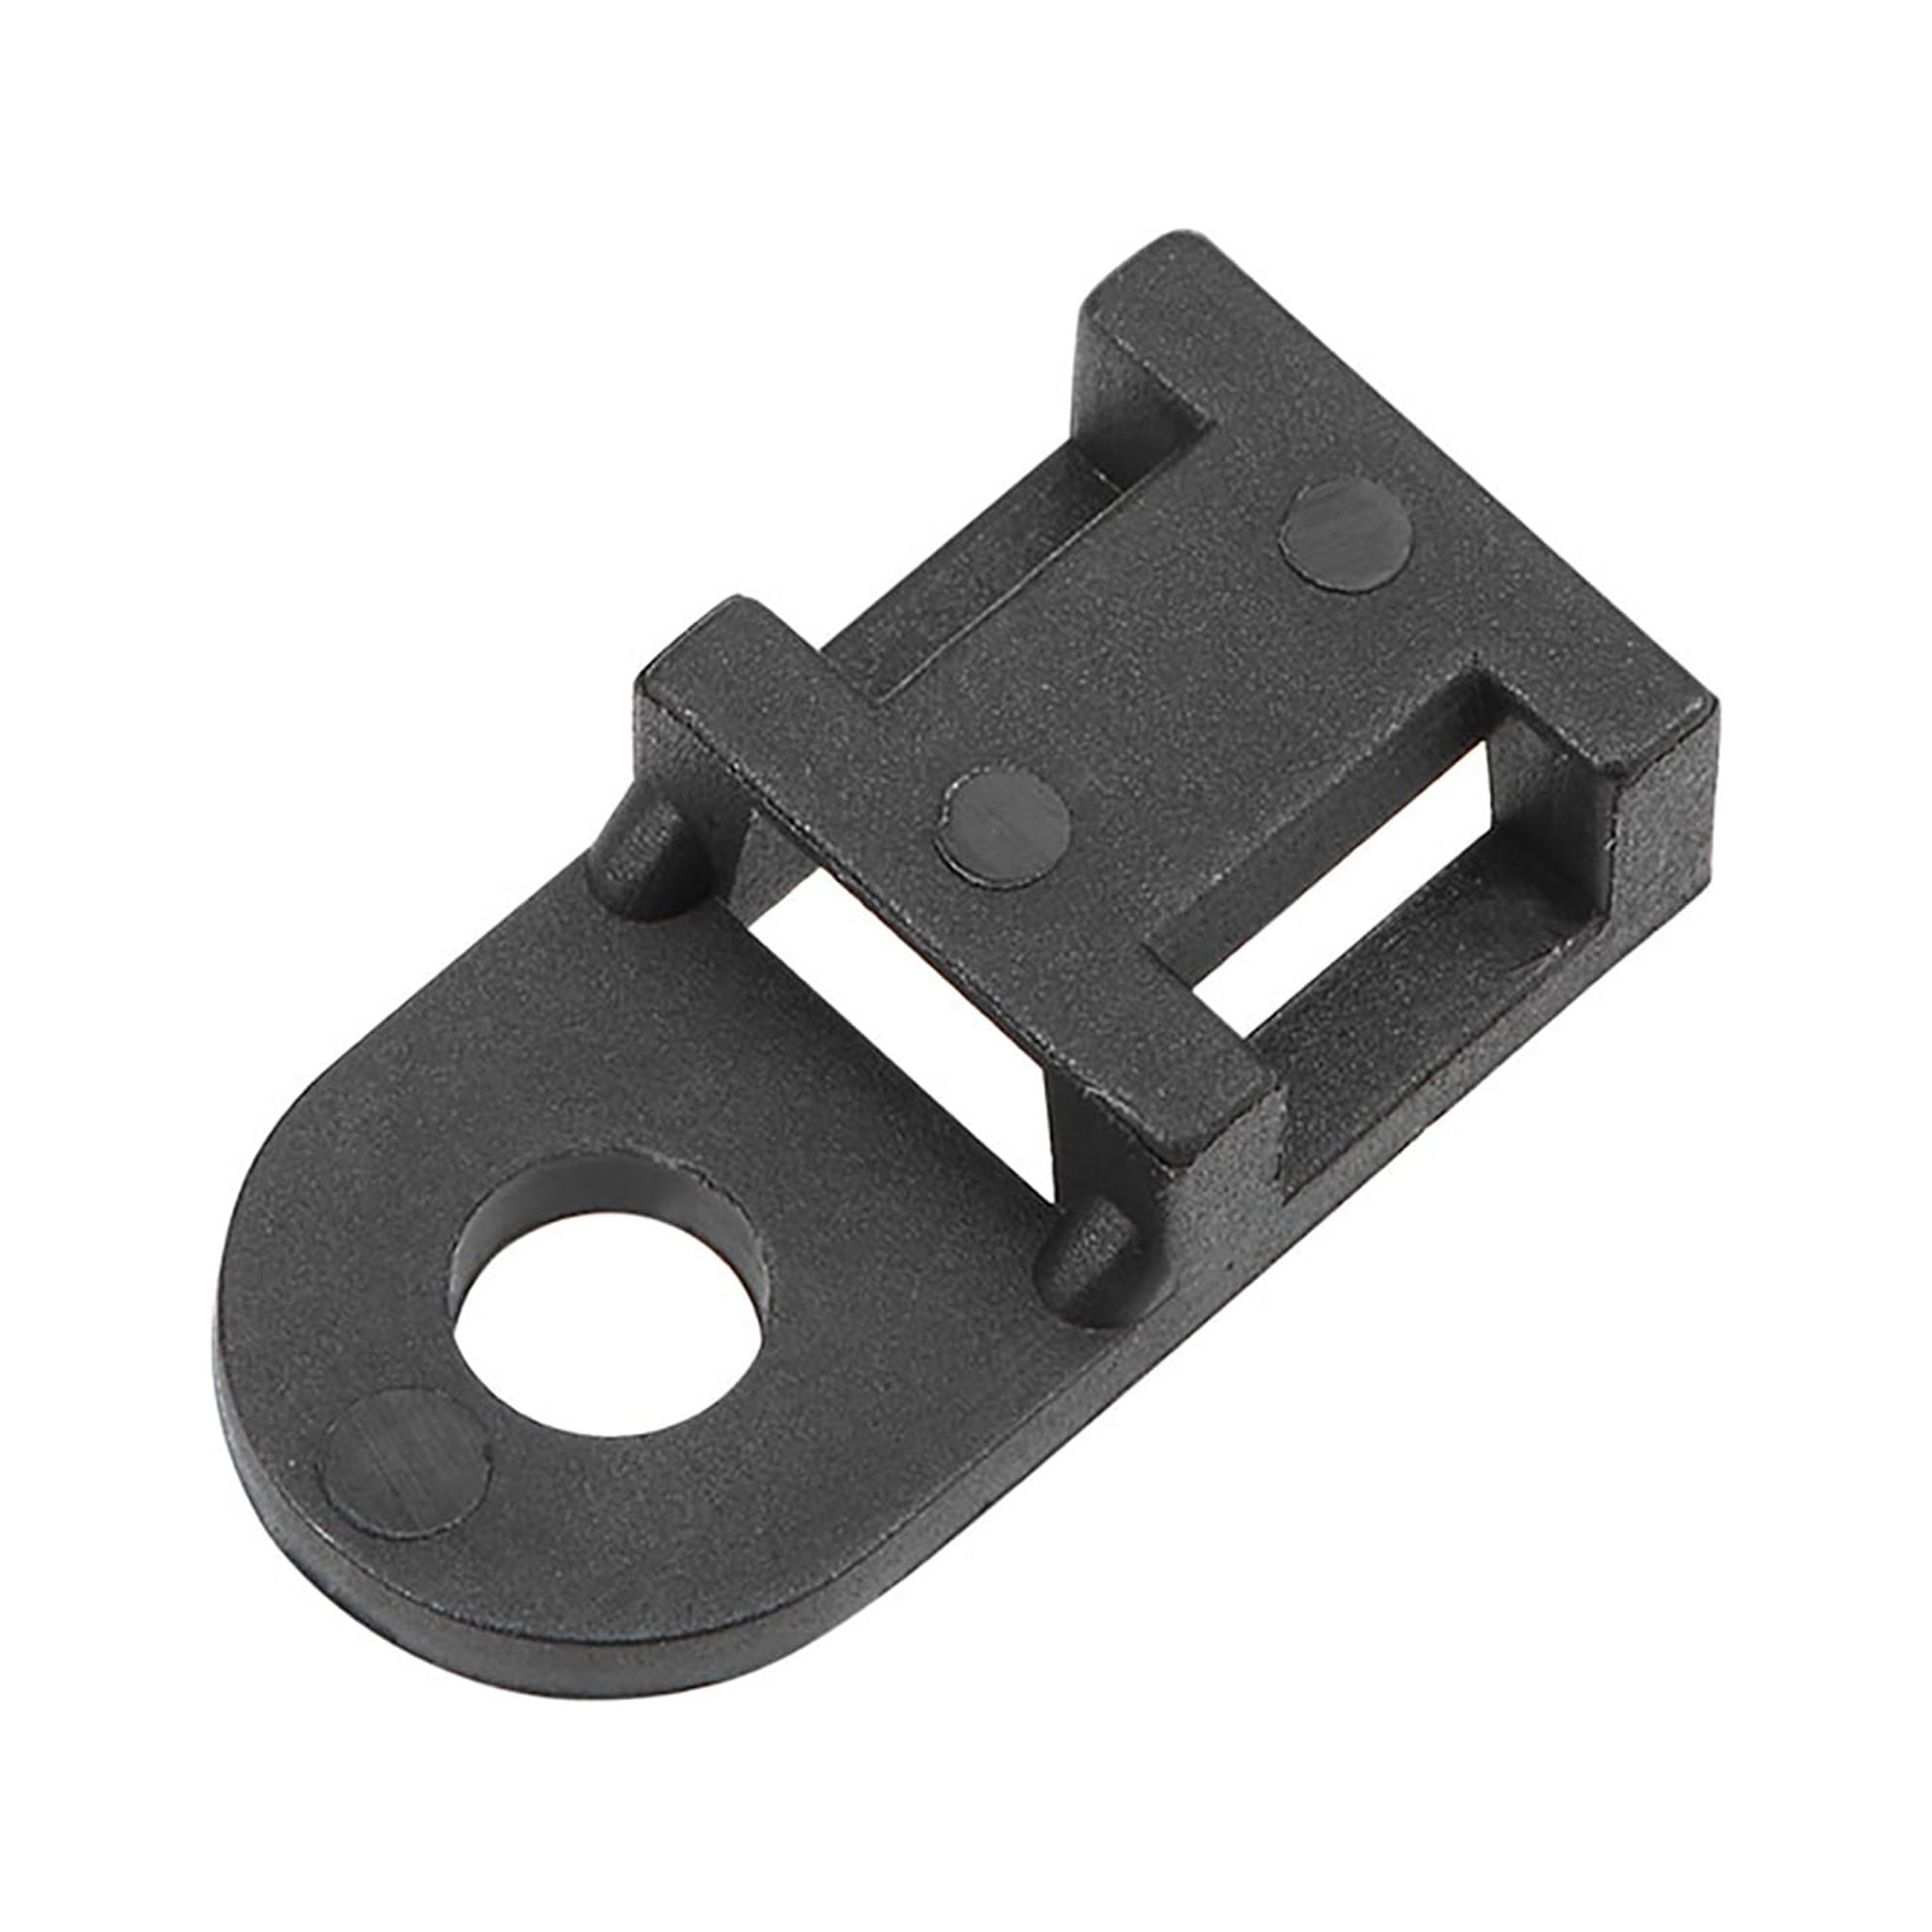 Cable Tie Mounts, Saddle Mounts and Bases